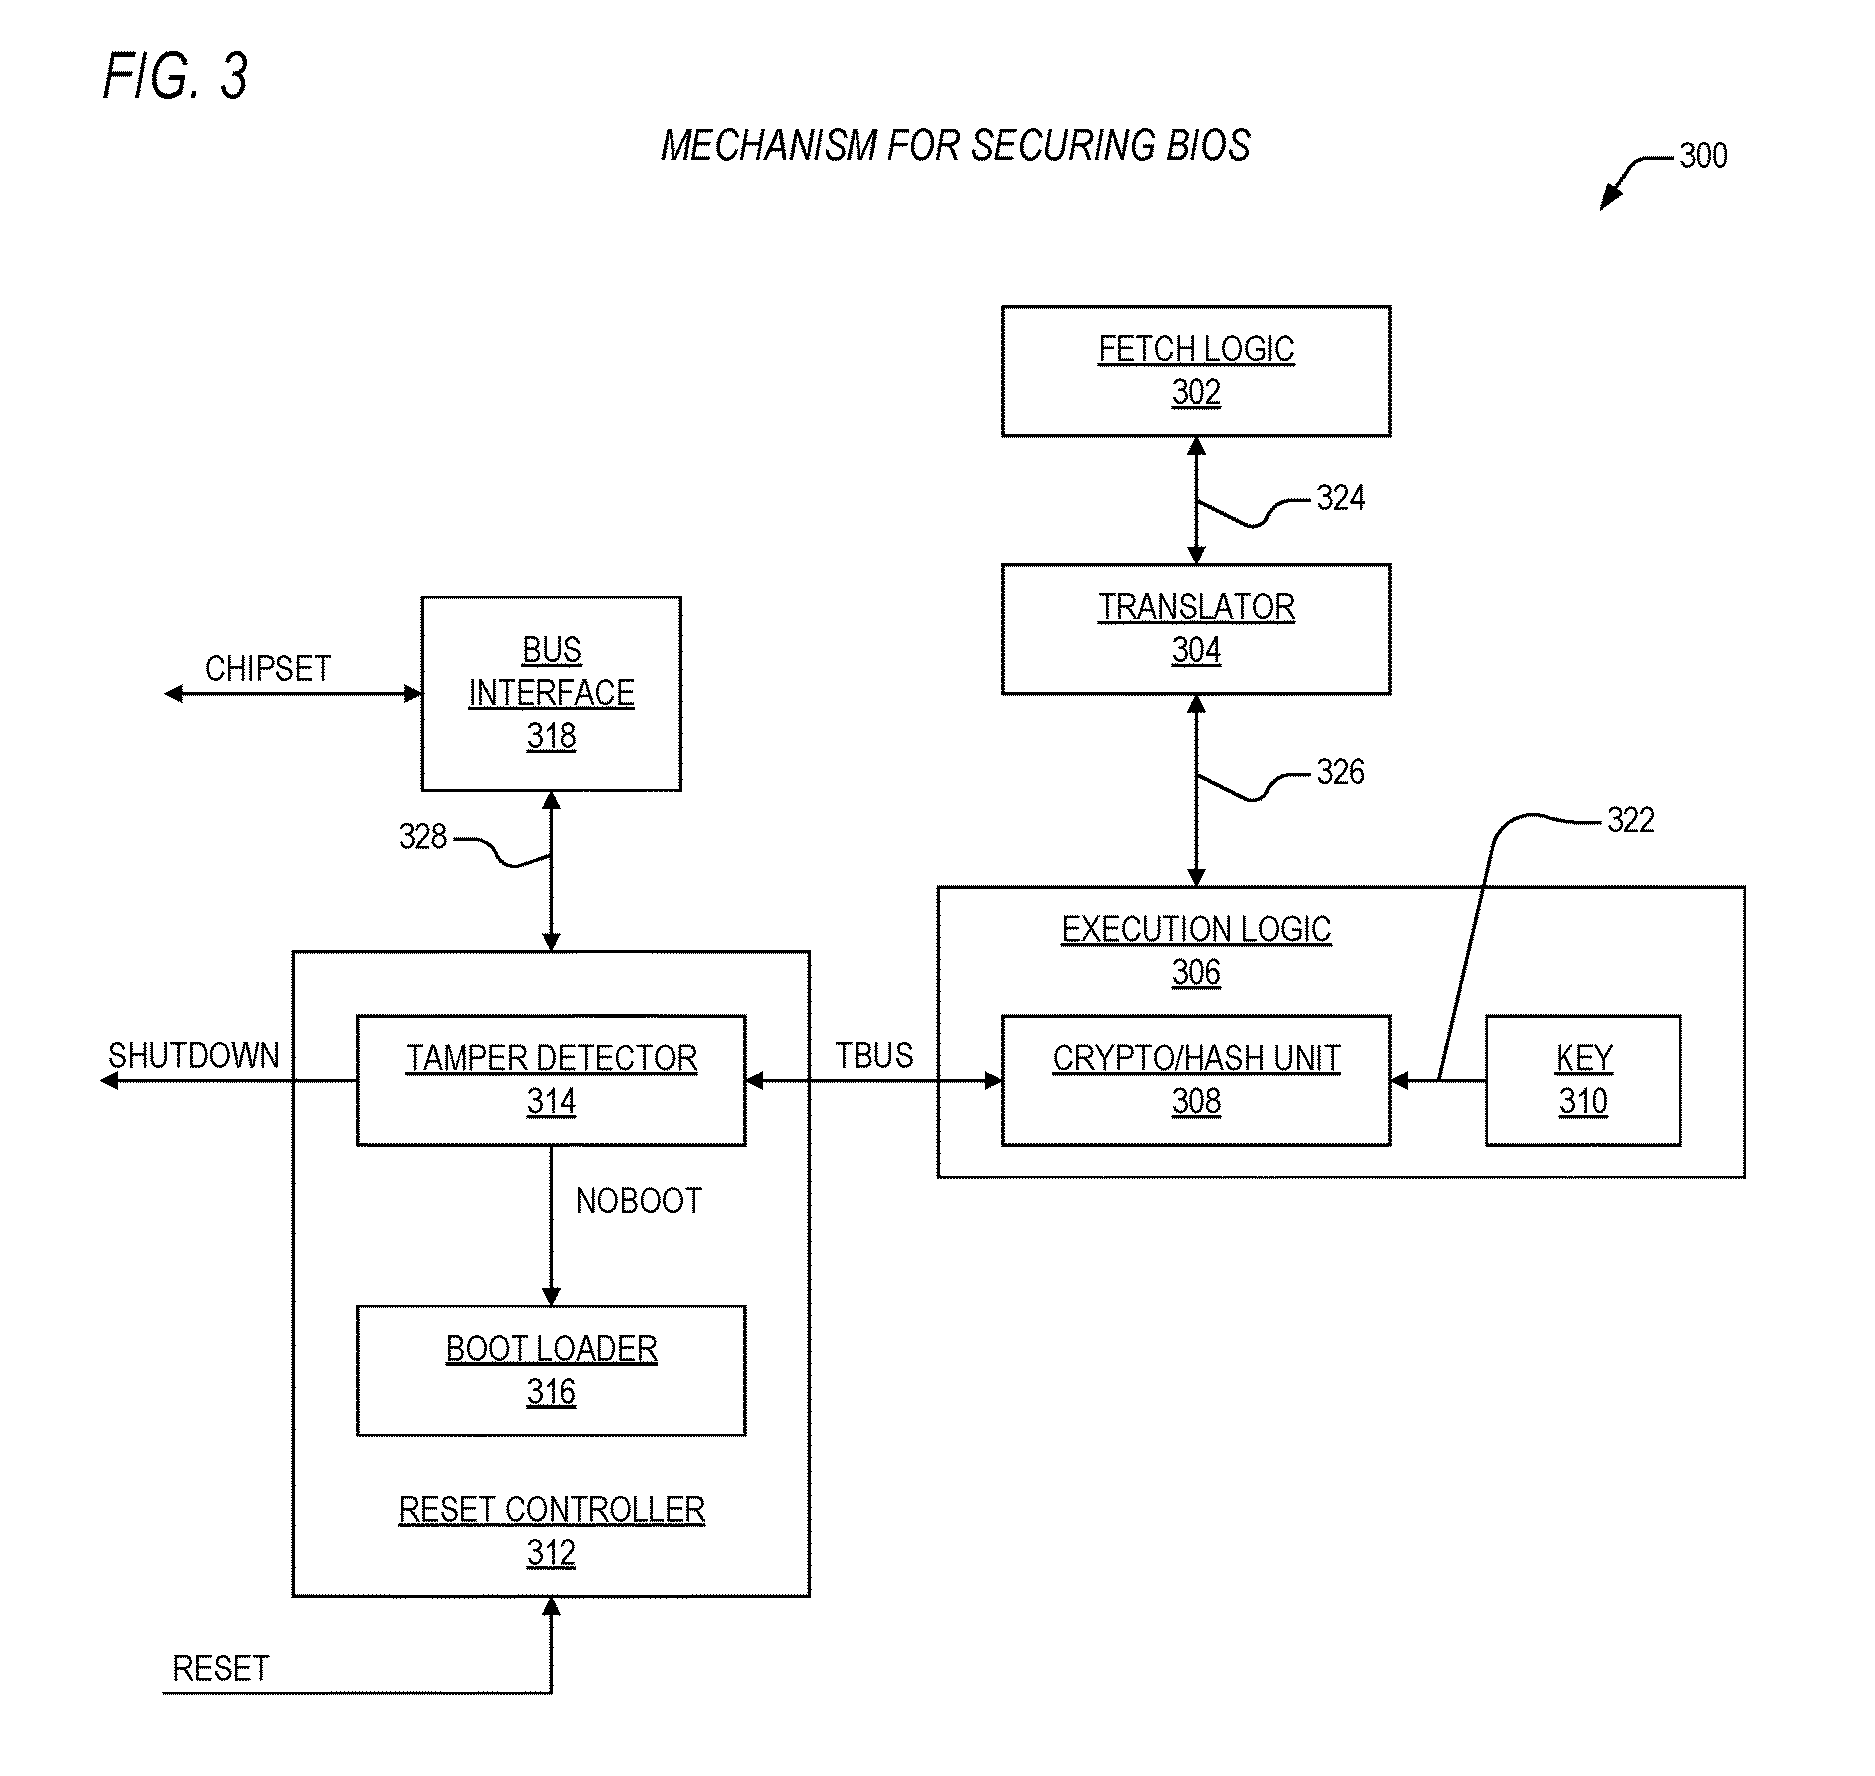 Fuse-enabled secure BIOS mechanism with override feature